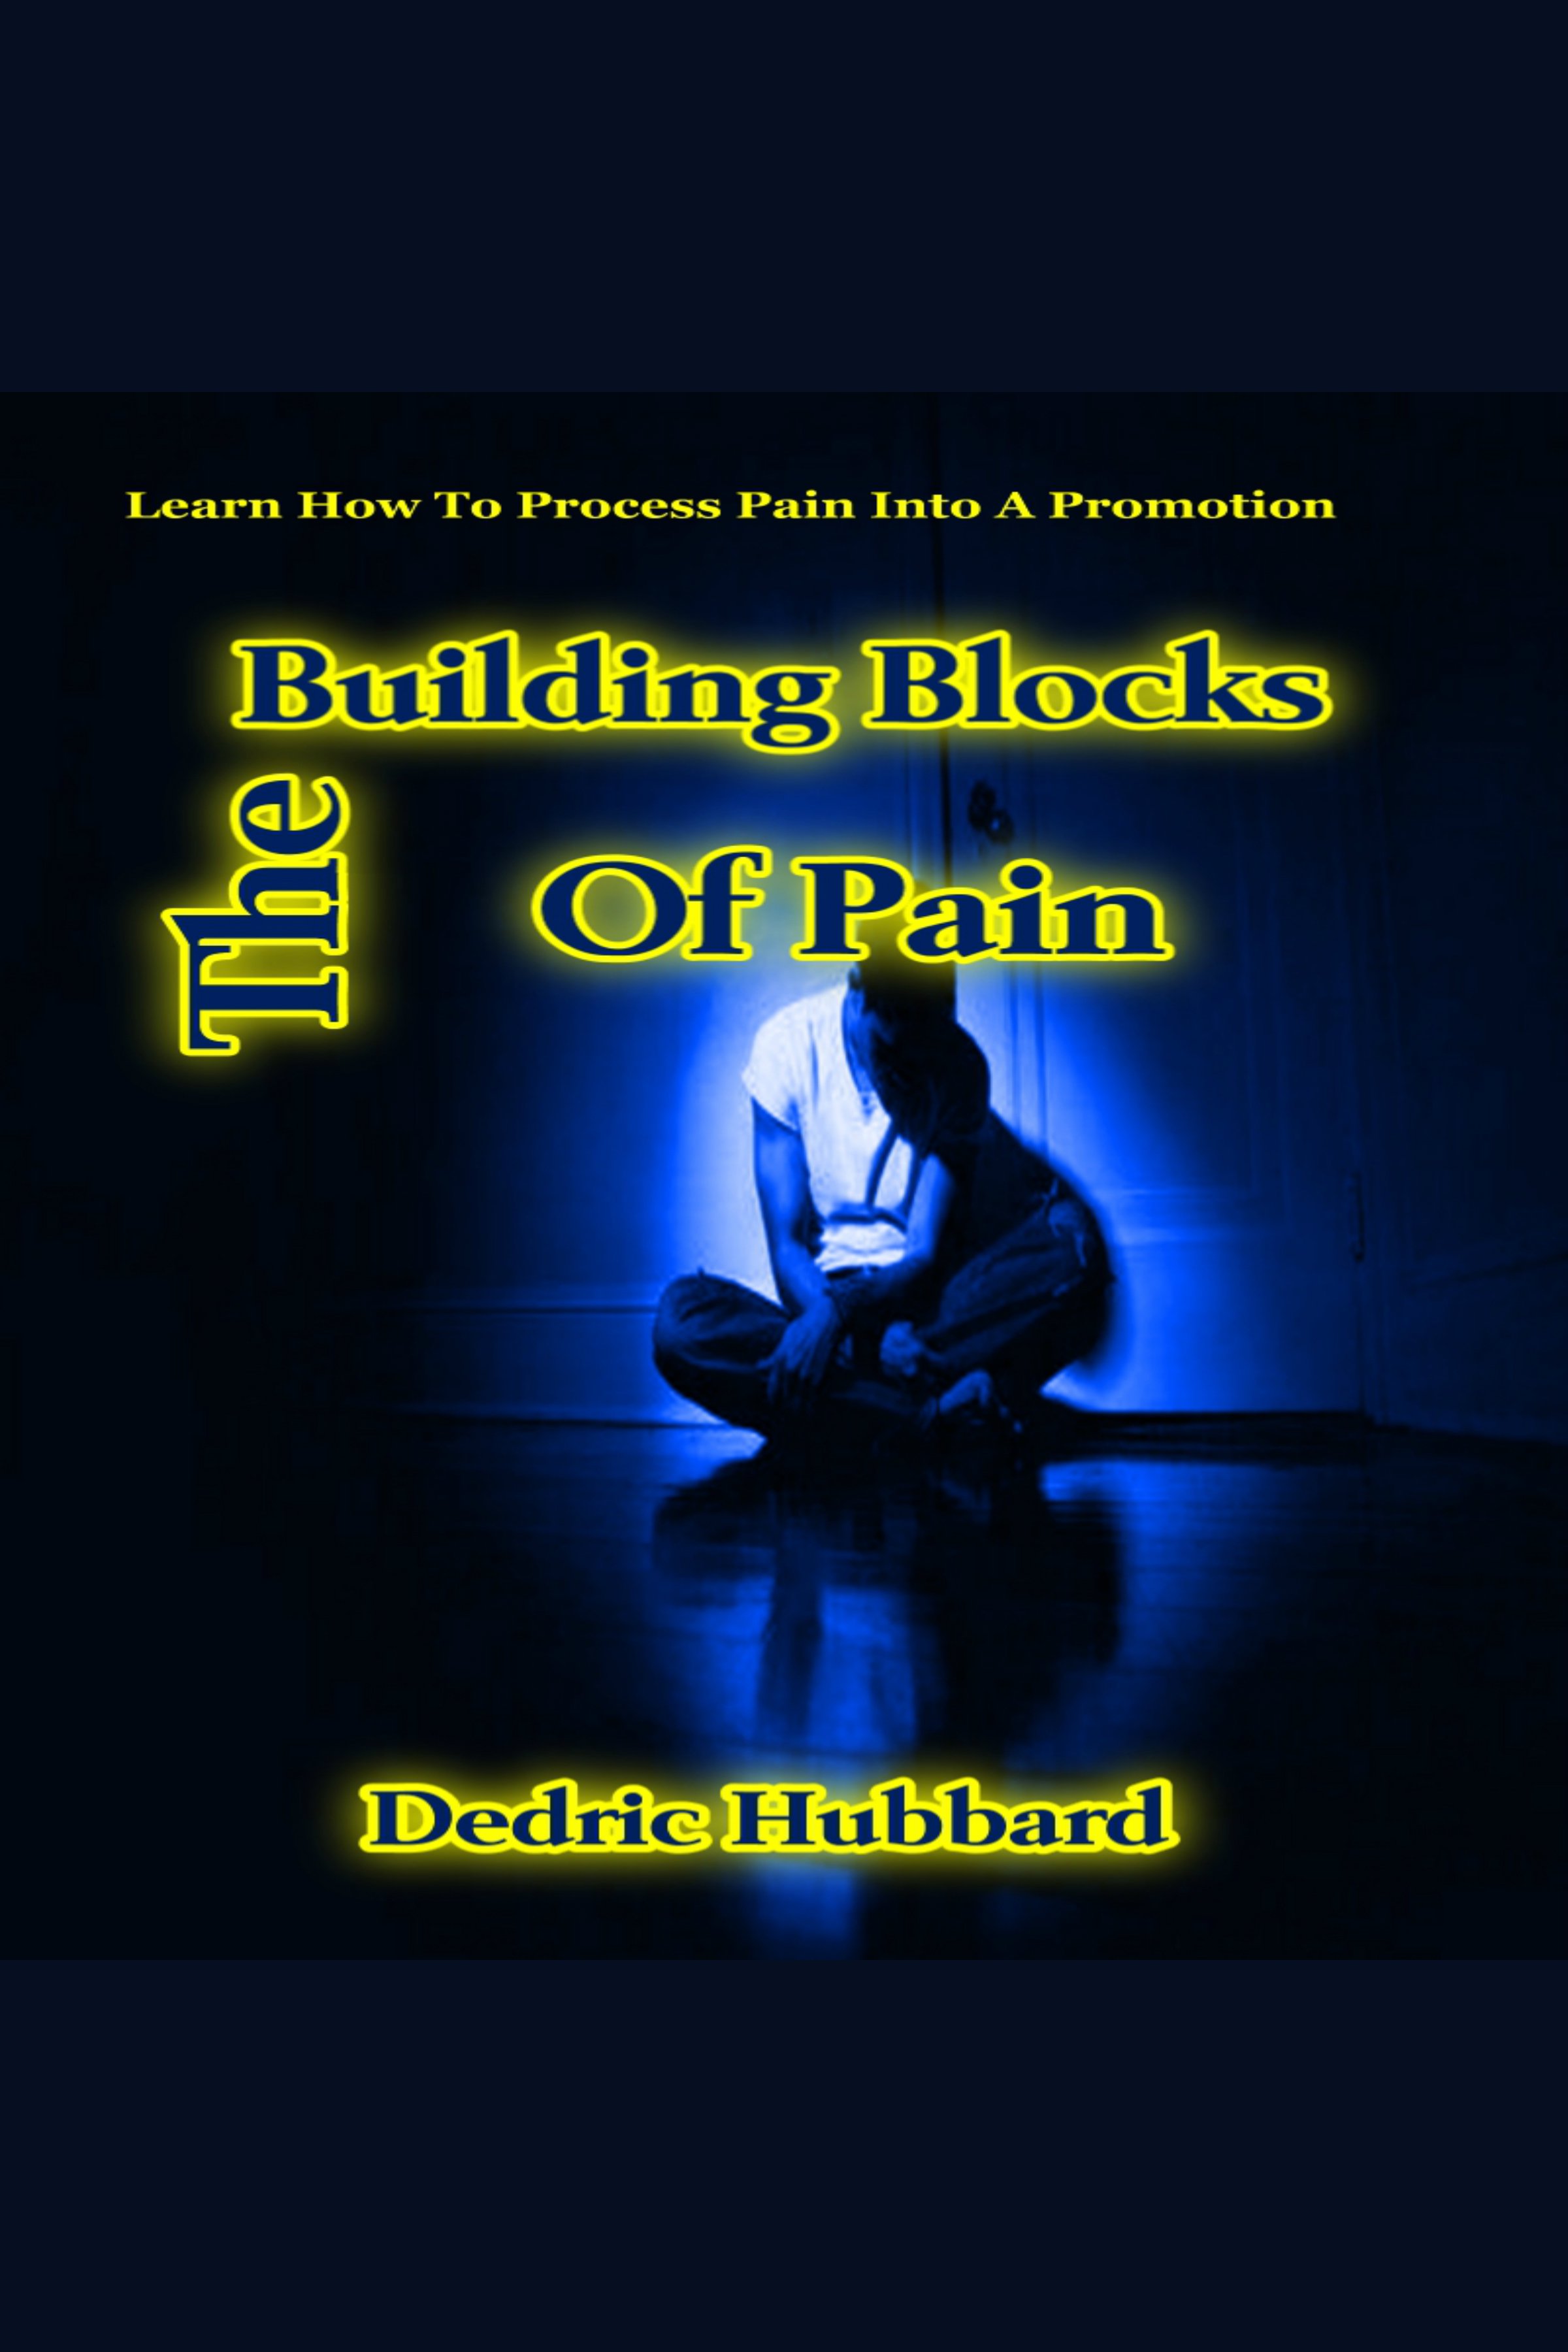 The Building Blocks Of Pain Learn How To Process Pain Into A Promotion cover image